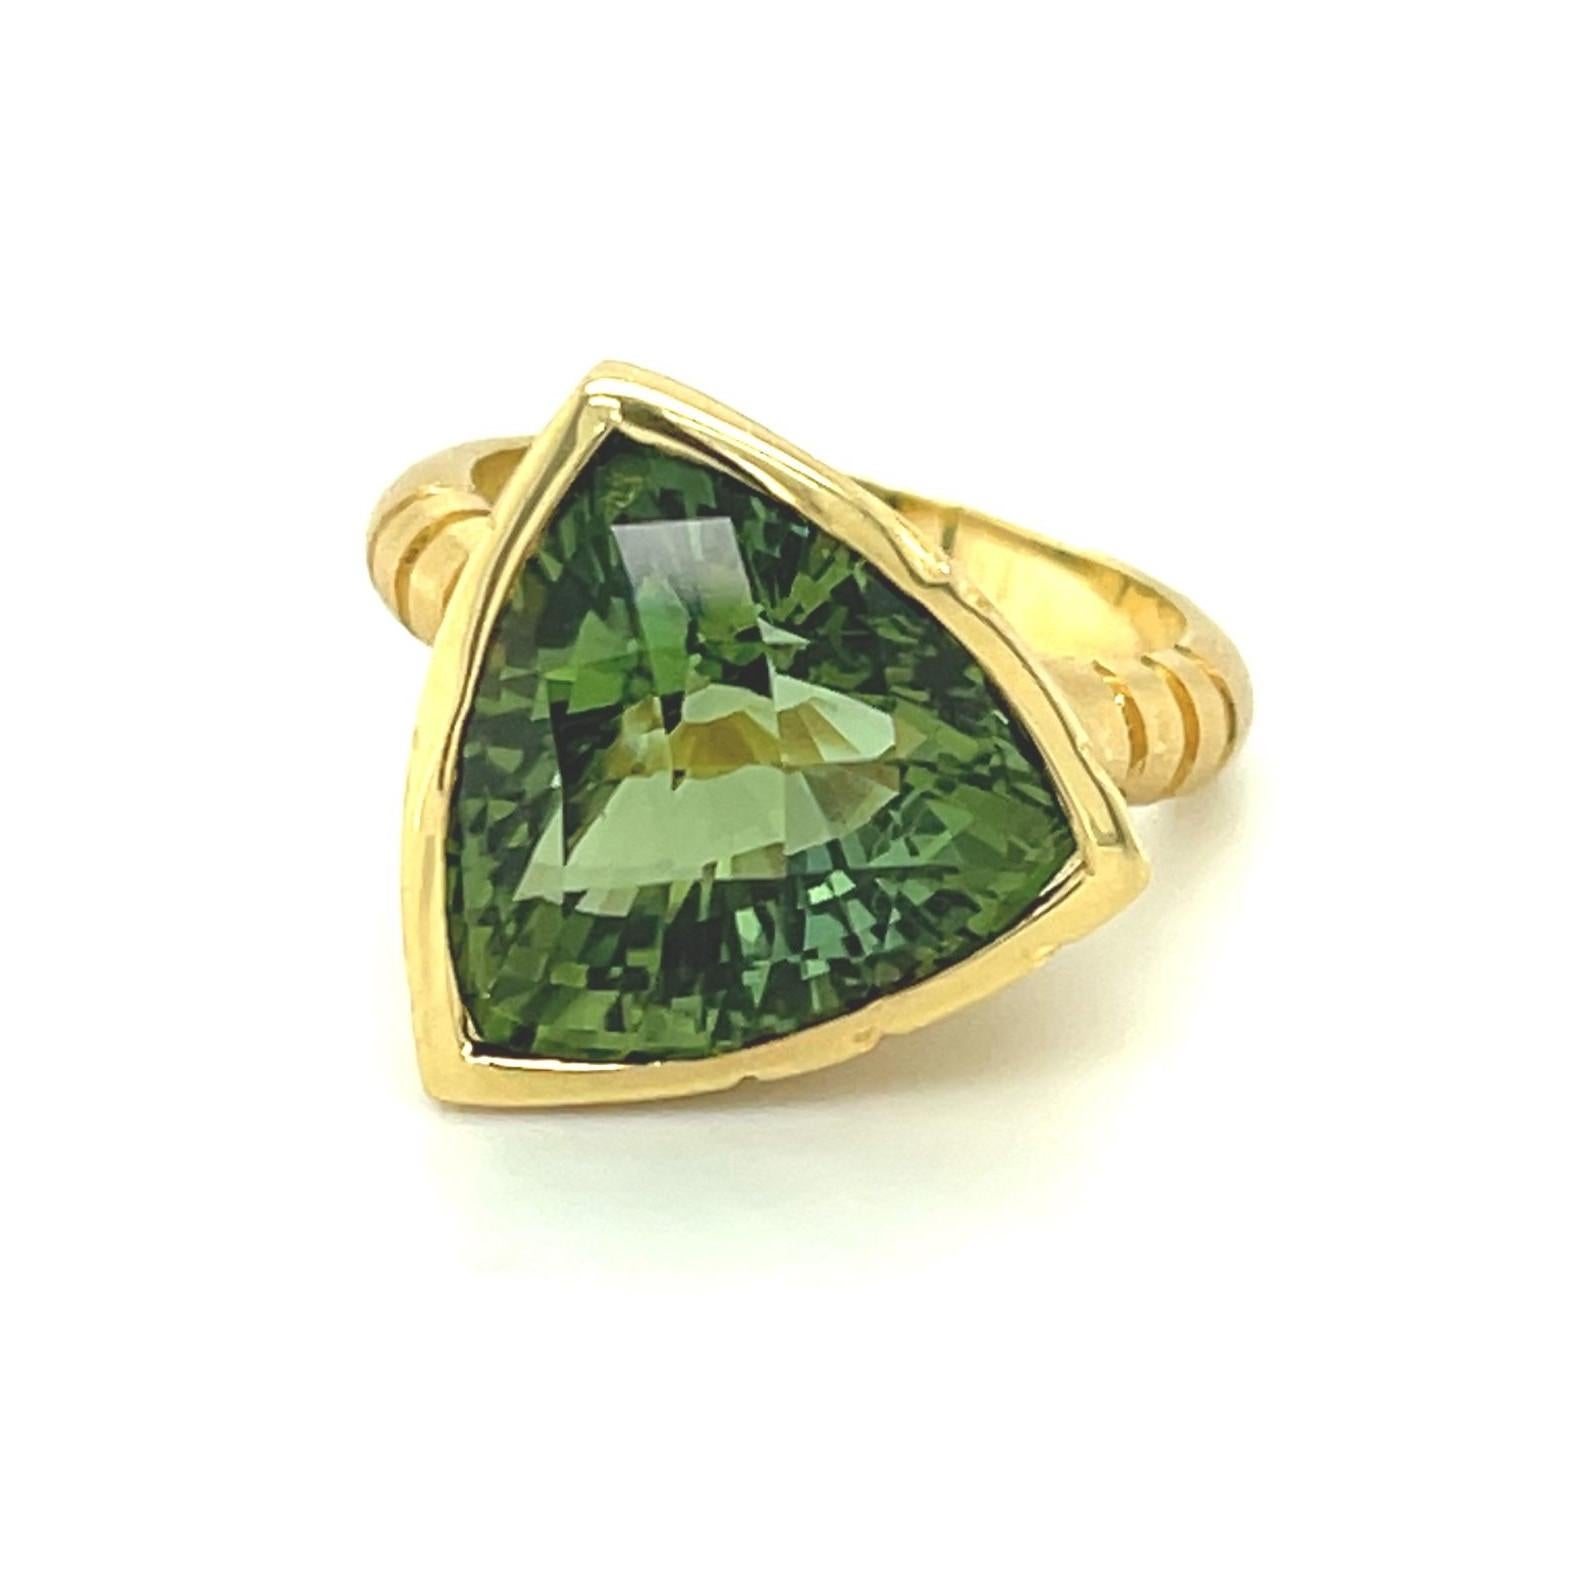 This bold, modern ring was custom-made in 18k yellow gold to showcase a gorgeous, custom cut green tourmaline. The center gemstone is a 